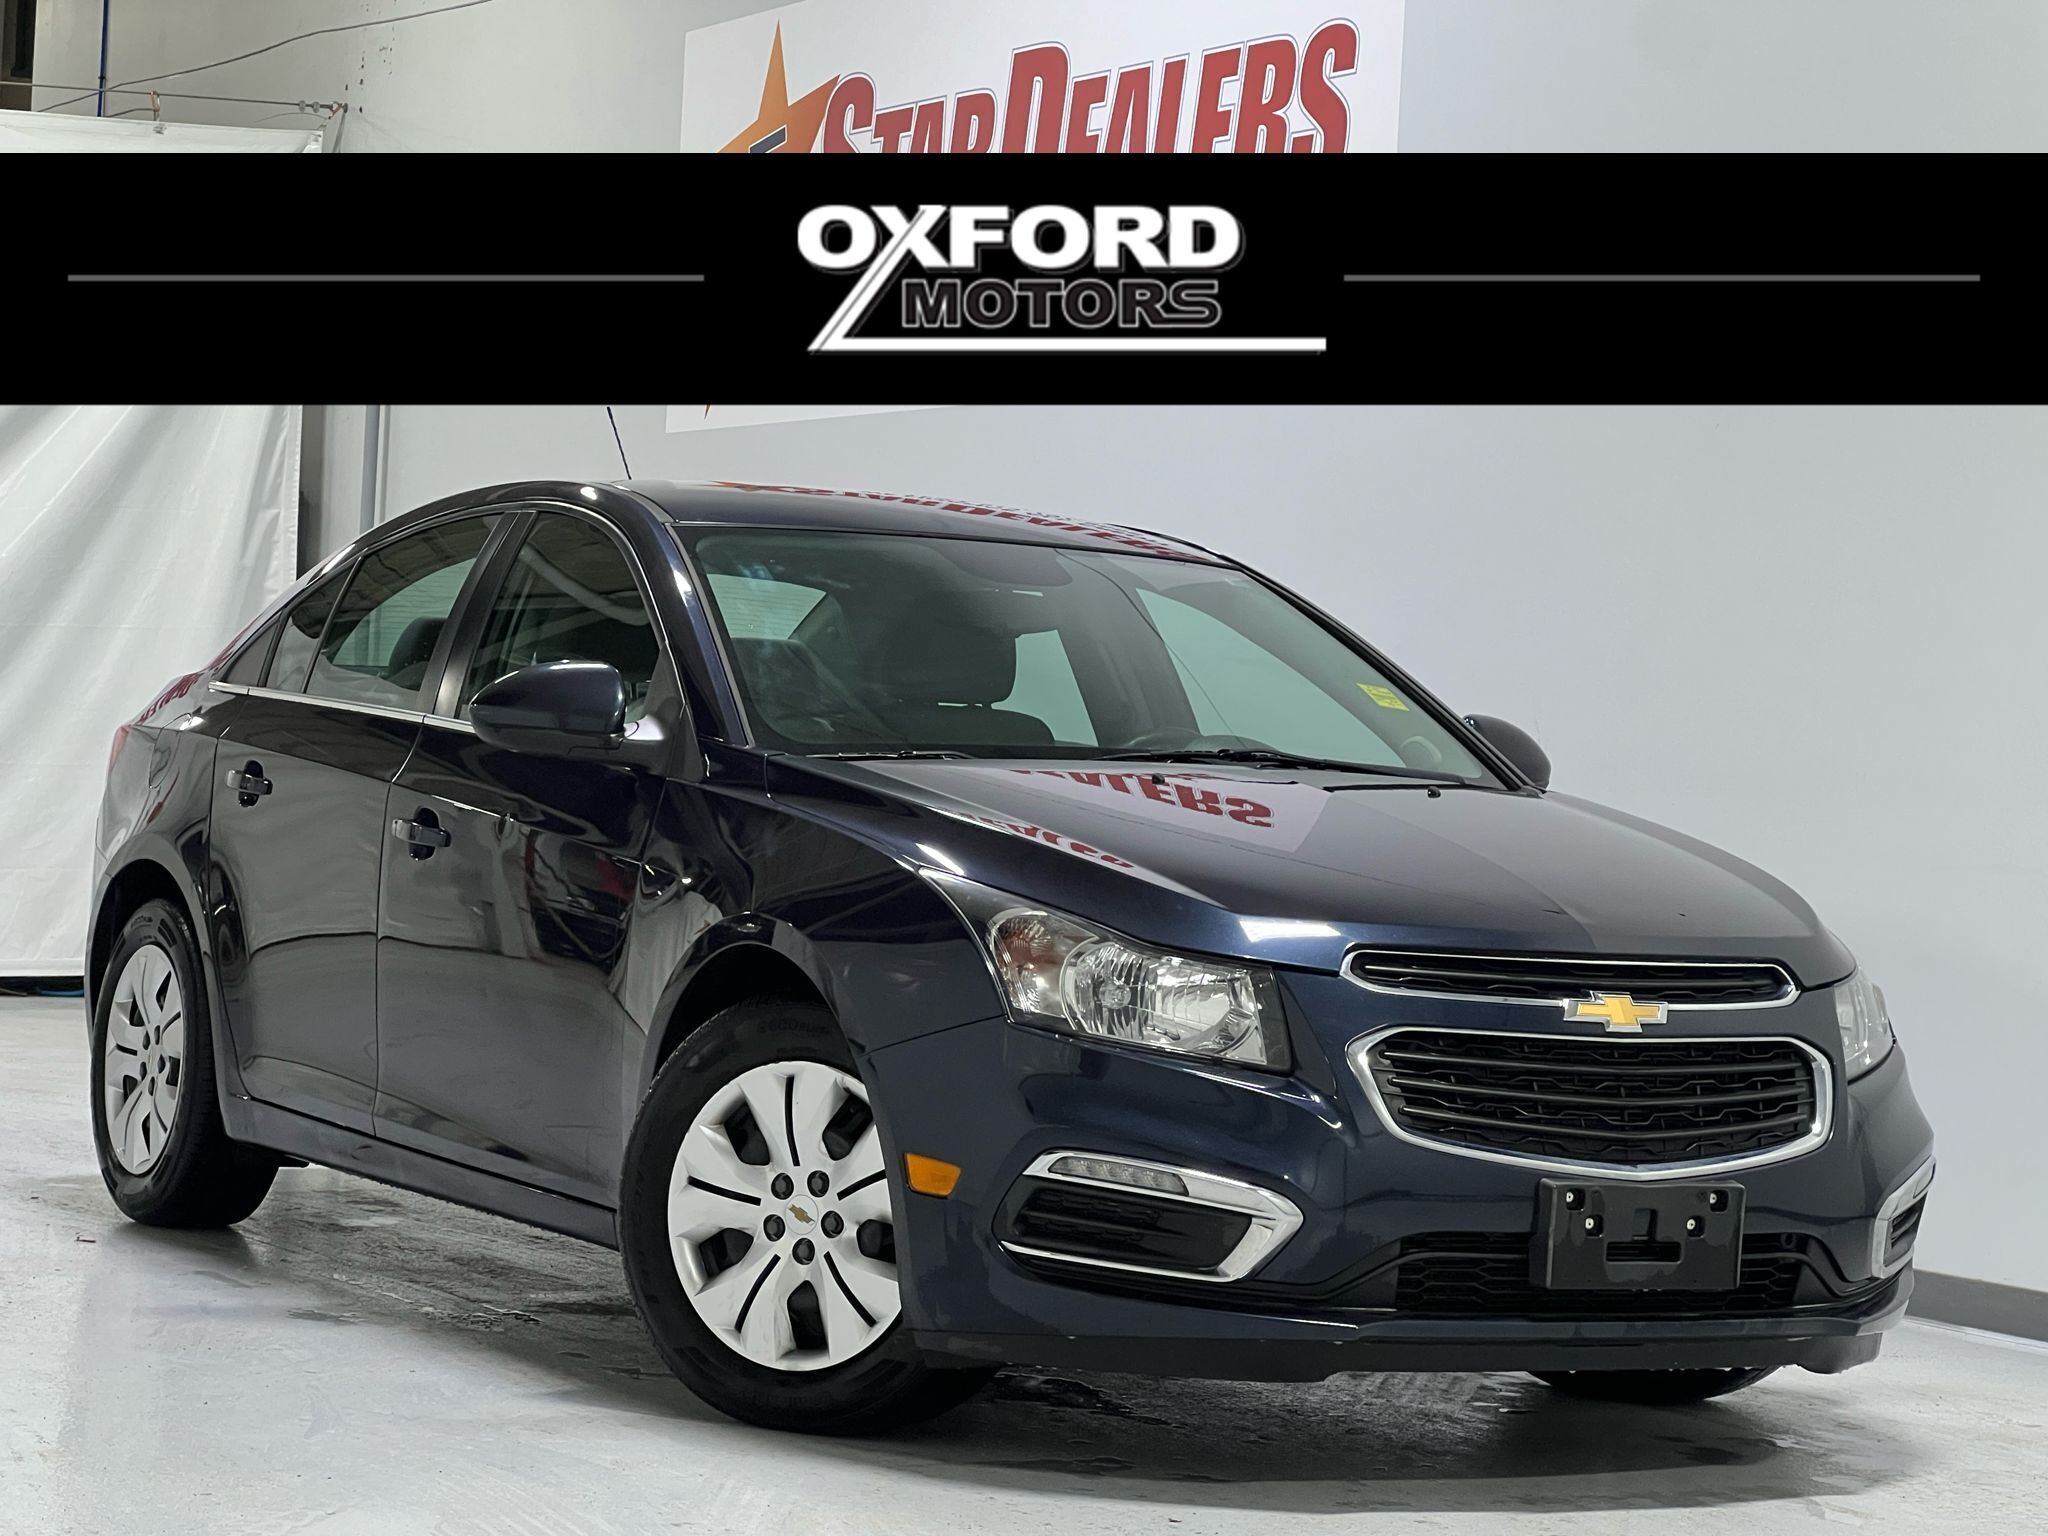 2015 Chevrolet Cruze GREAT CONDITION! MUST SEE! WE FINANCE ALL CREDIT!